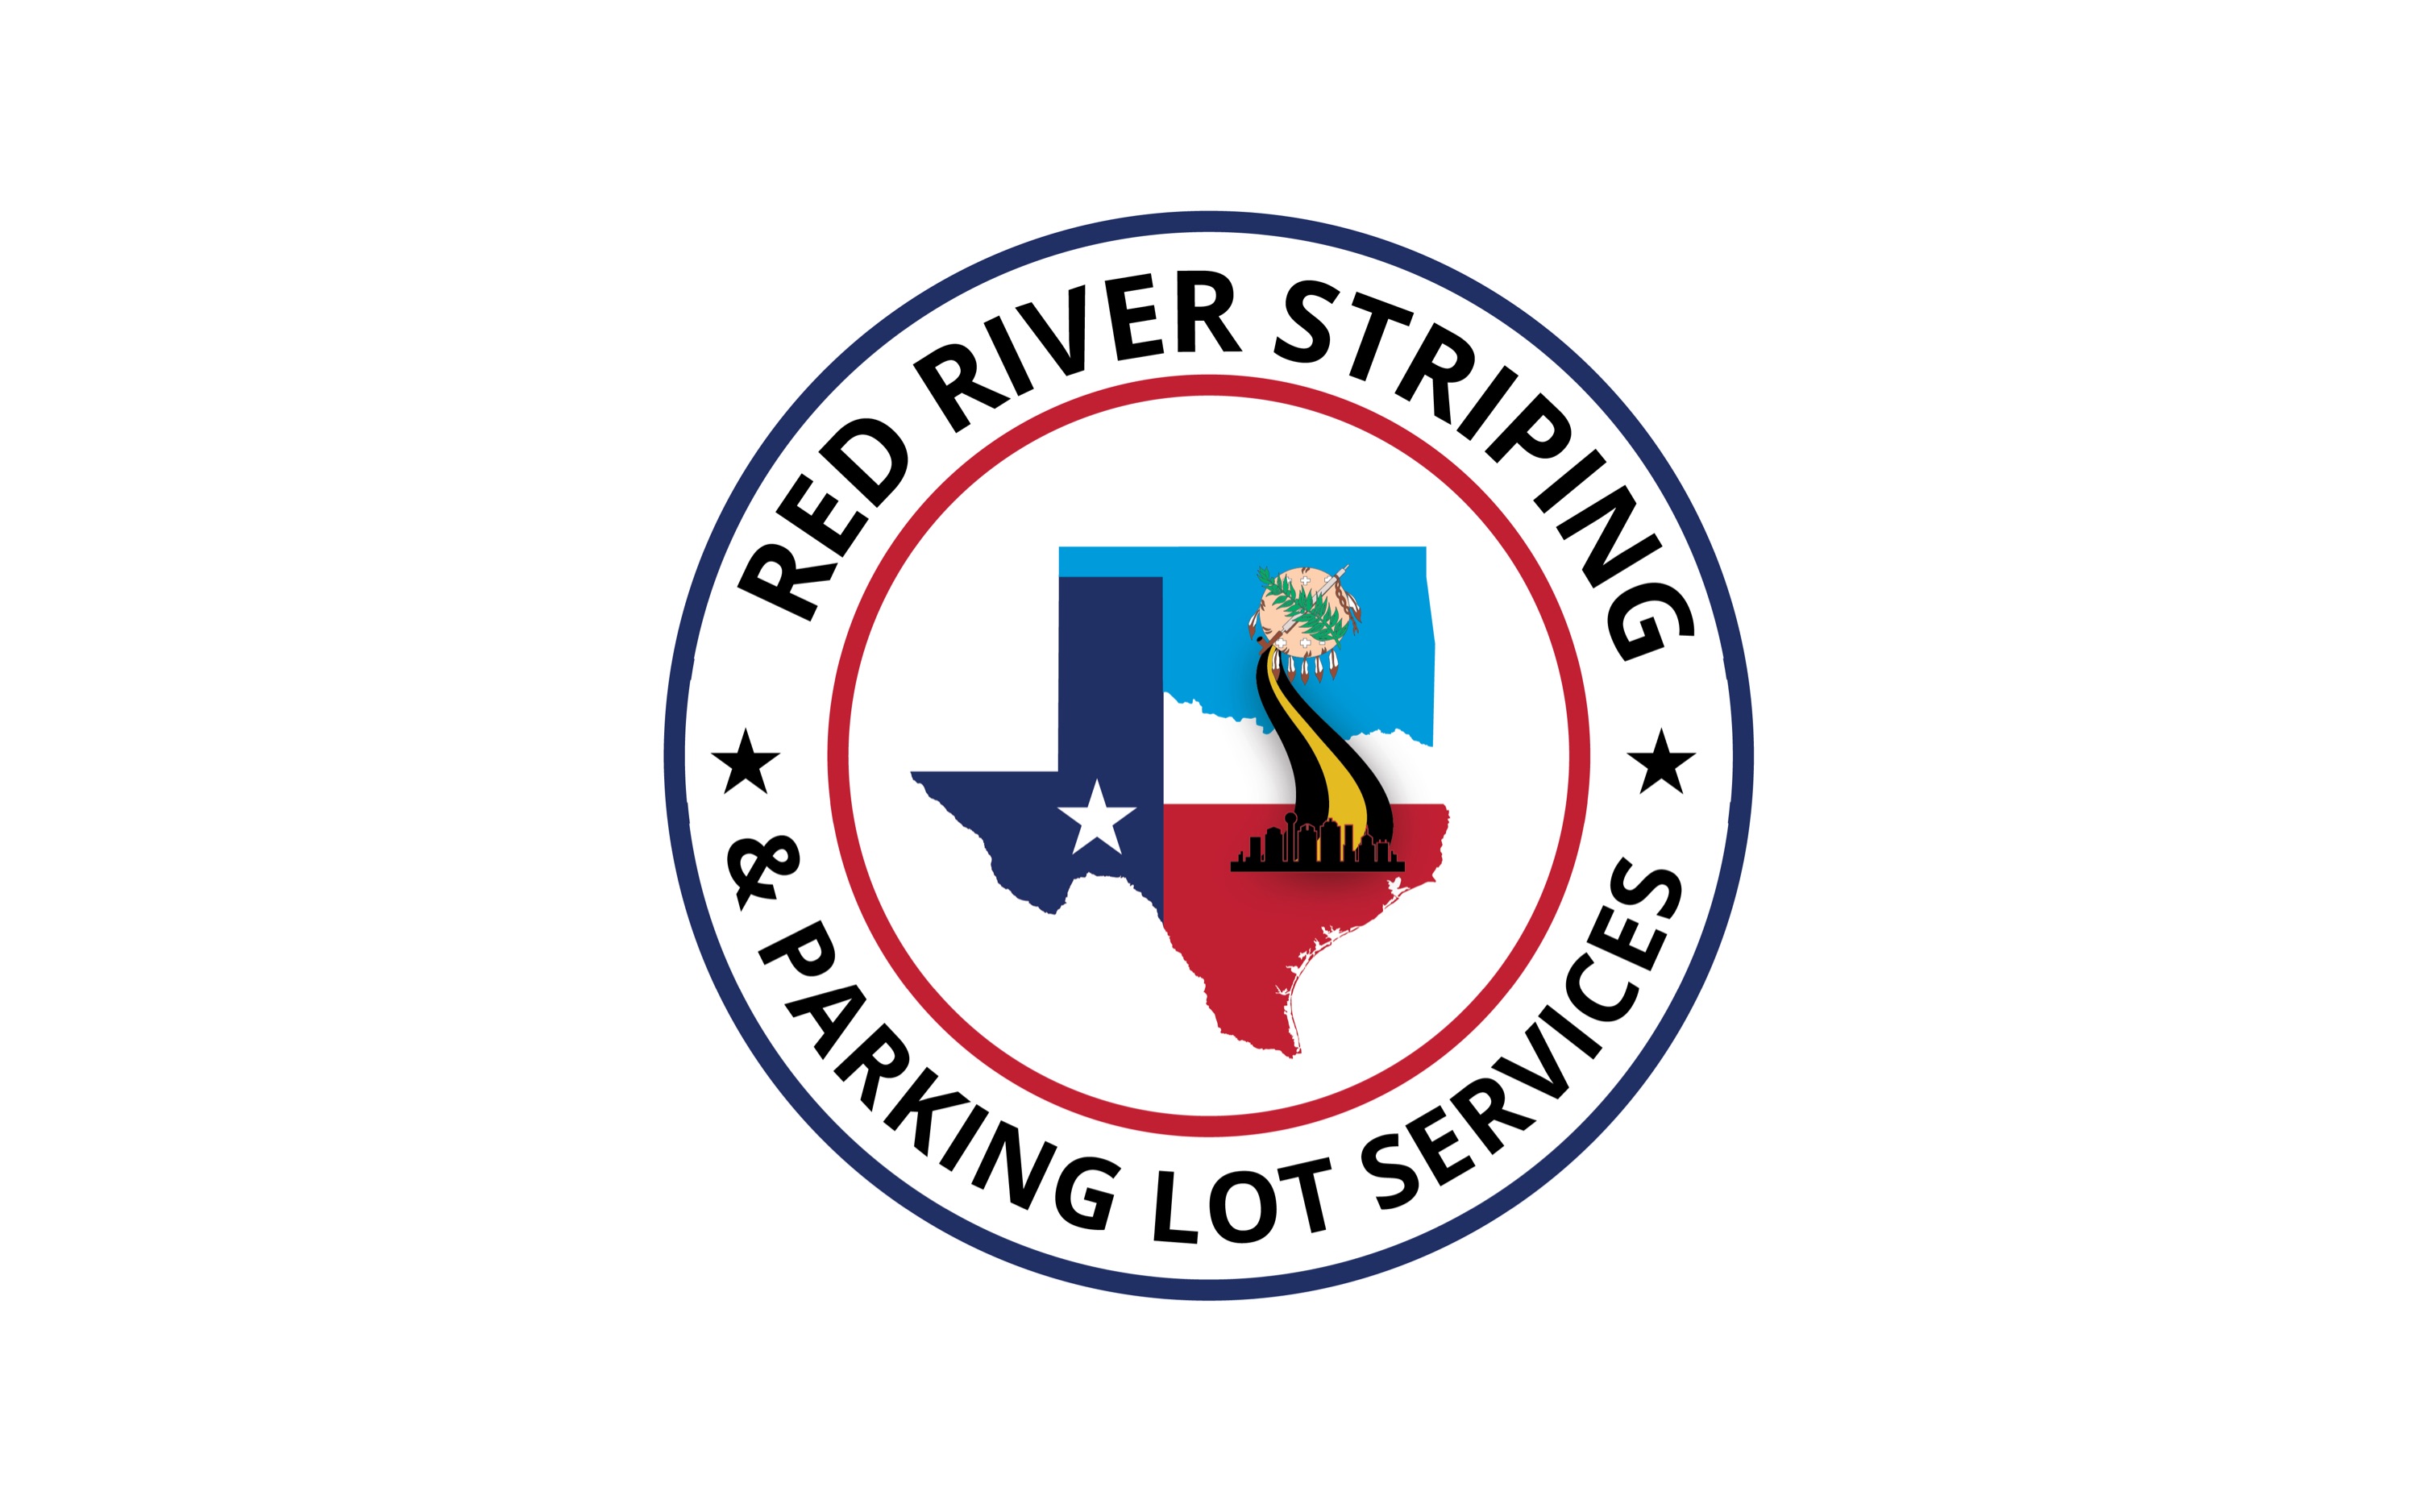 Red River Striping & Parking Lot Services Logo